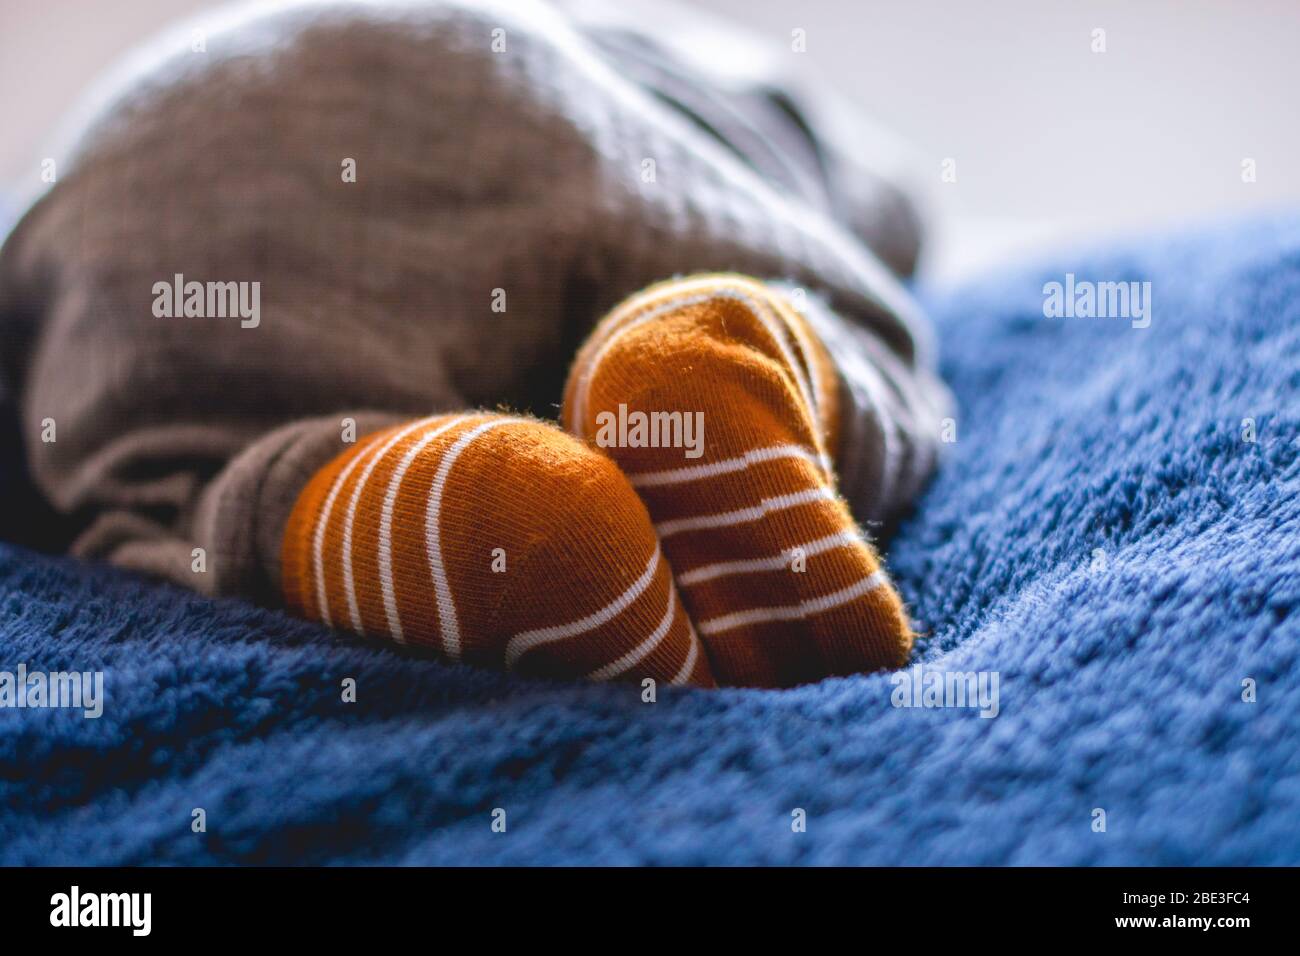 Newborn baby feet with yellow striped socks from behind on a blue soft blanket Stock Photo